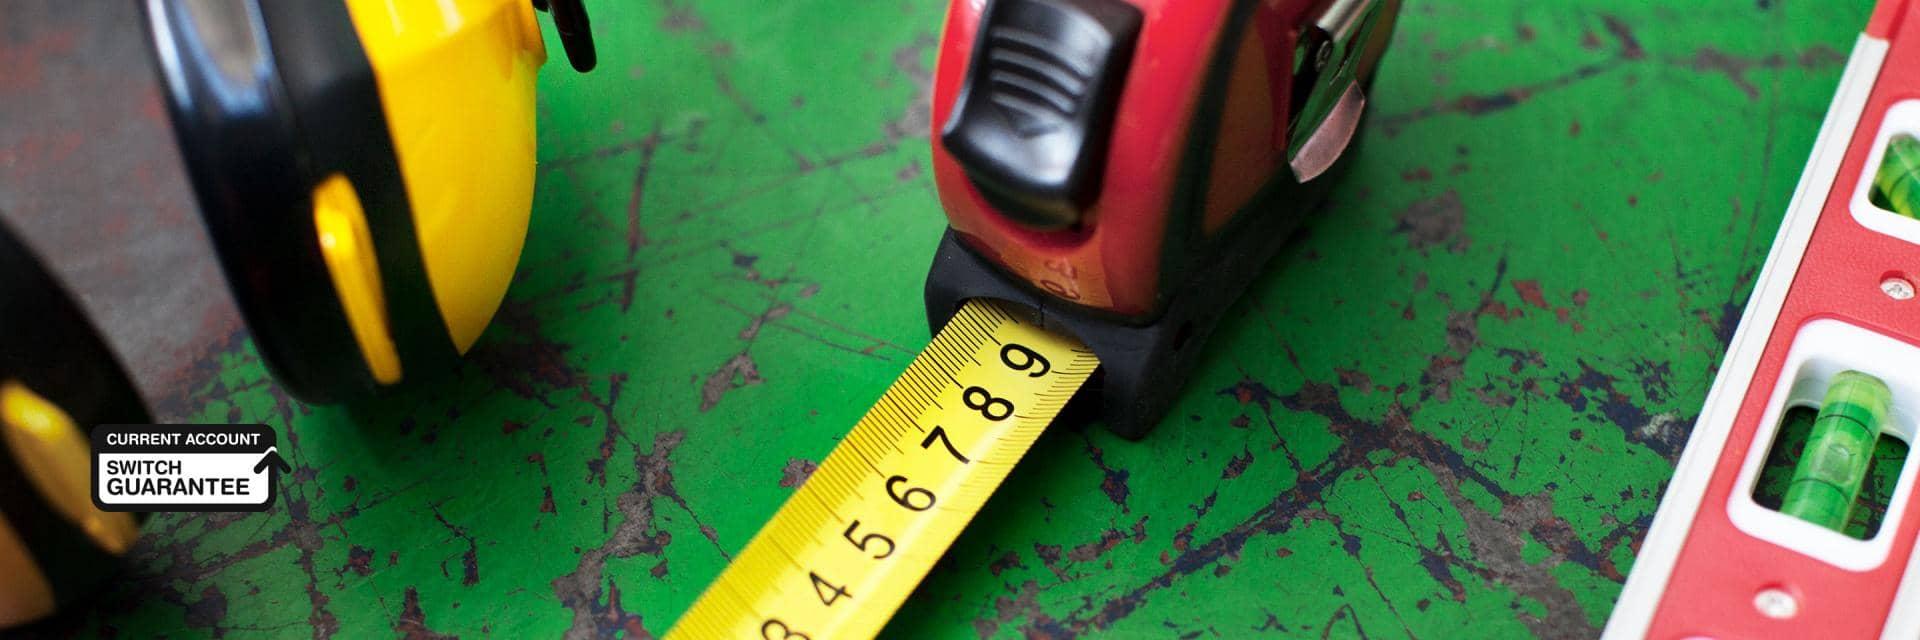 Ear protectors, a tape measure and a spirit level arranged on a workbench